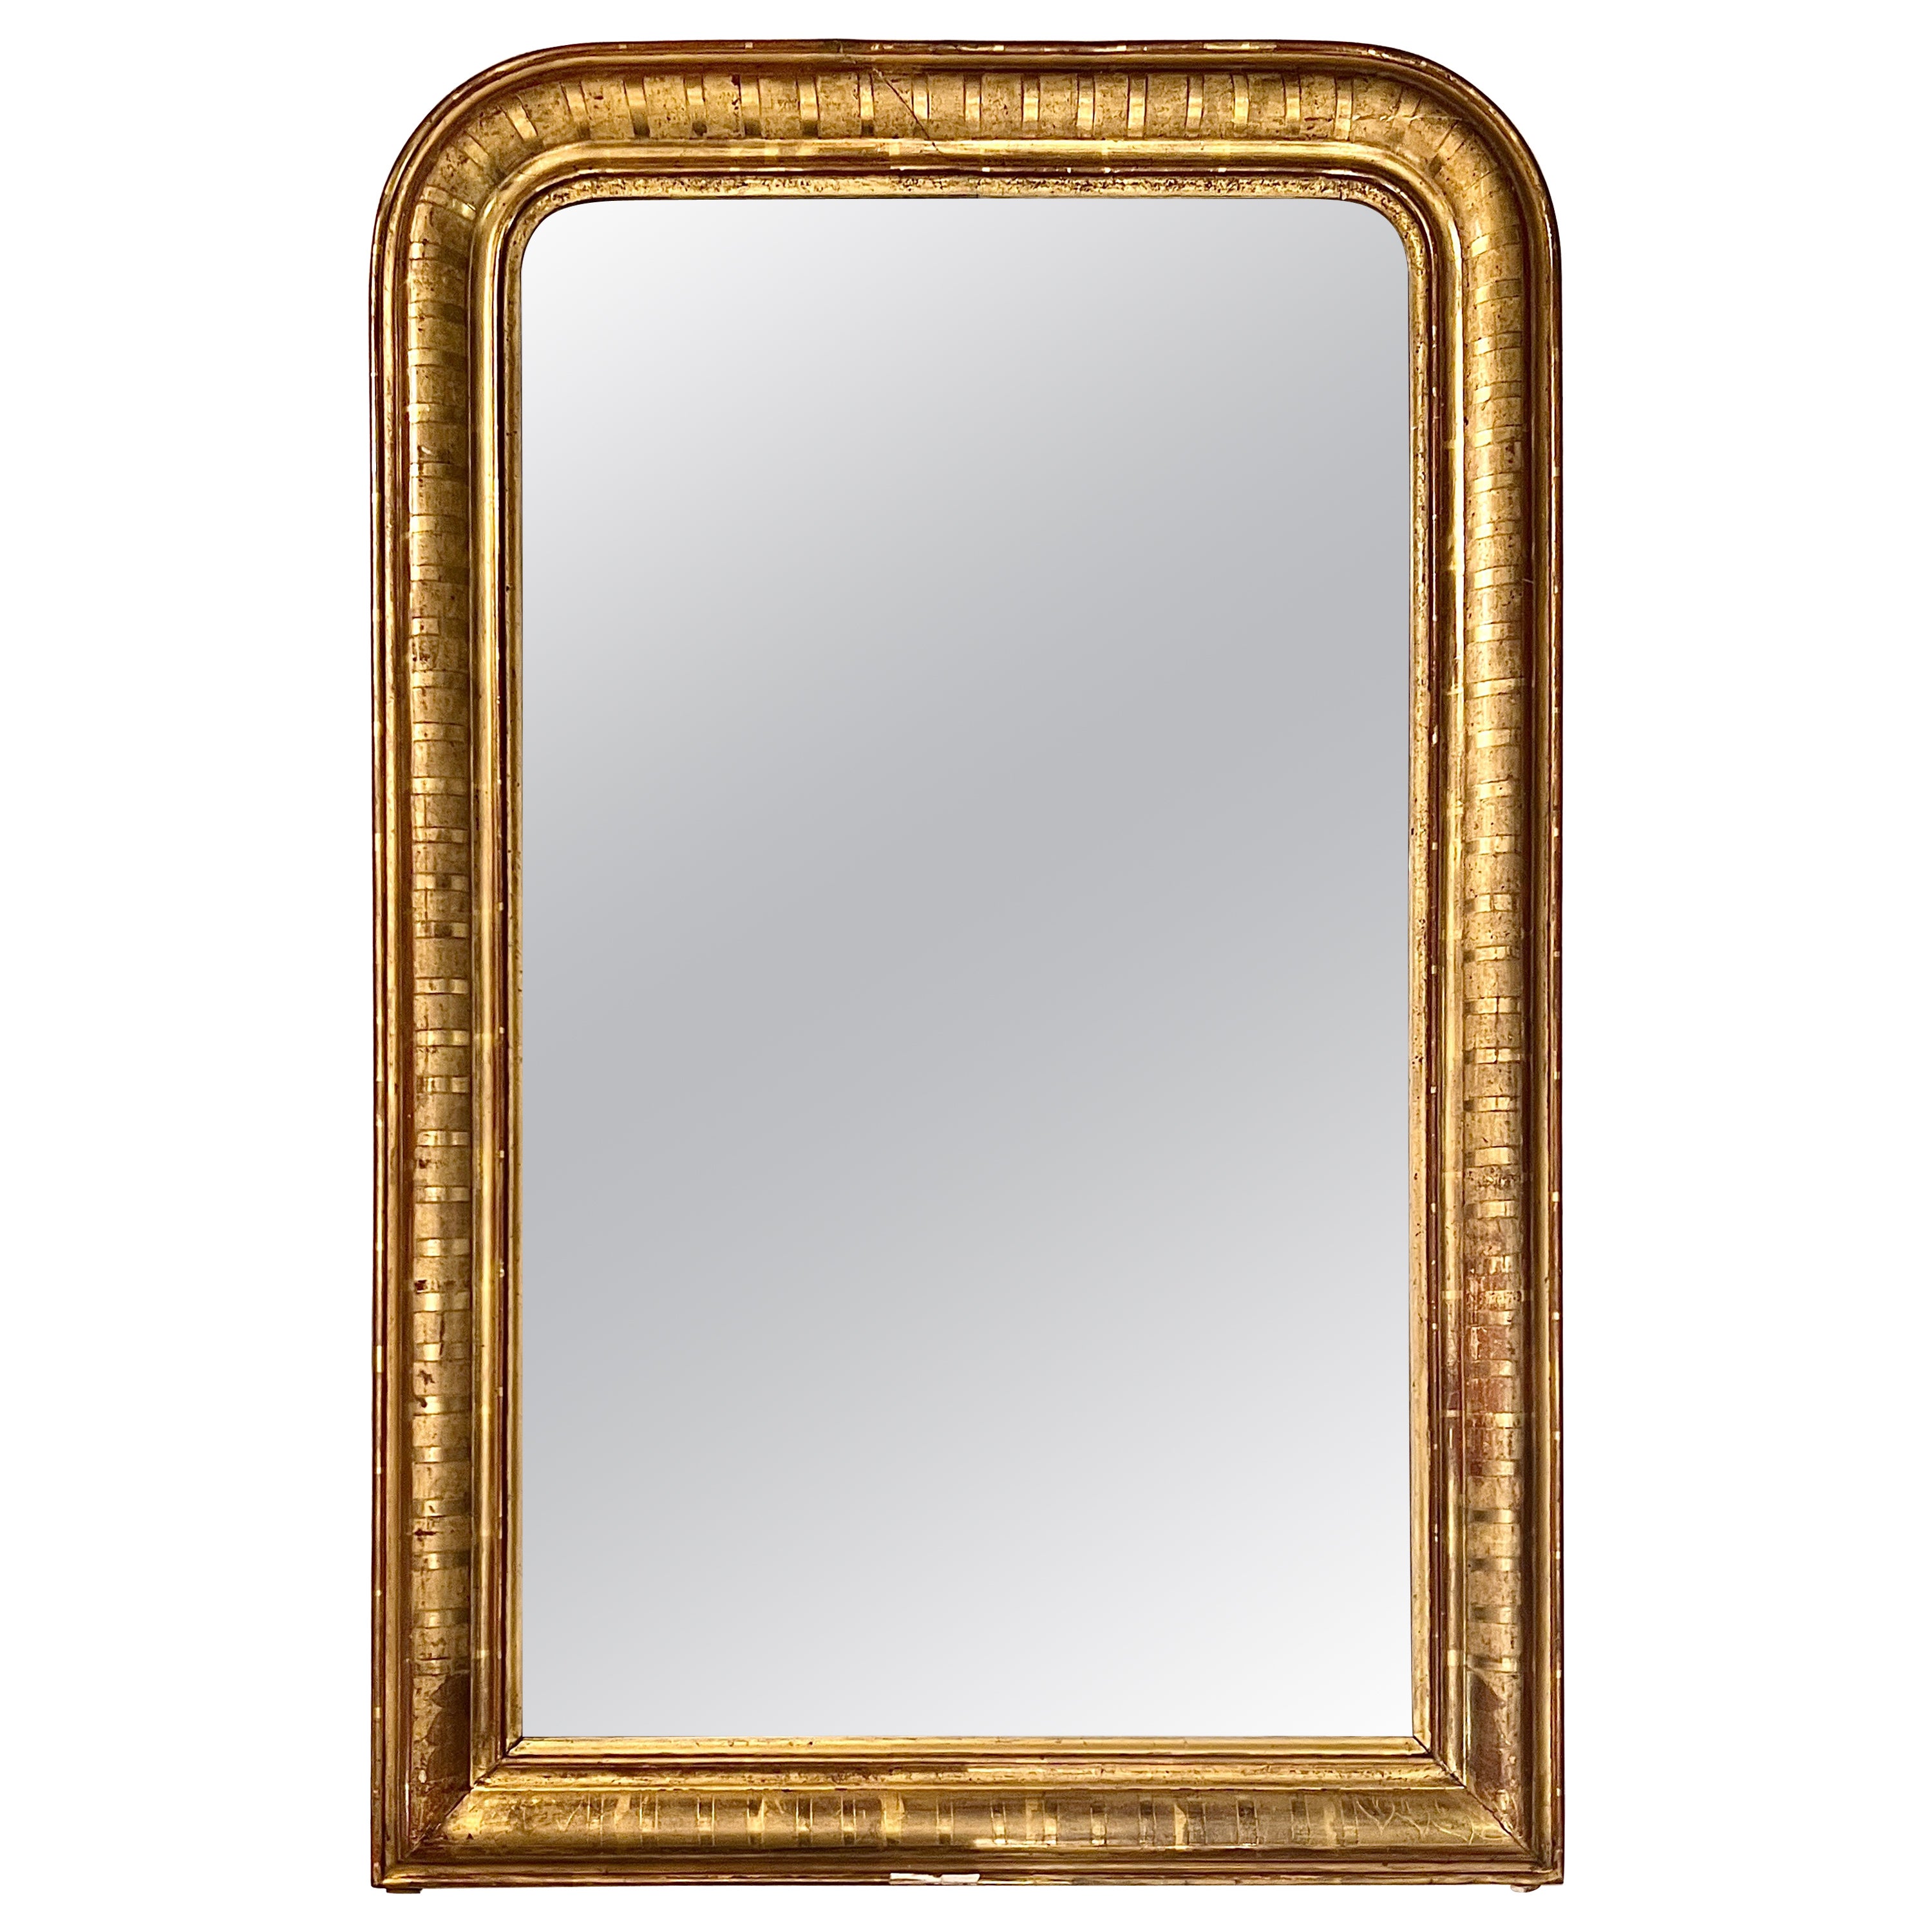 Antique French Louis Philippe Carved Gilt Wood Mirror, Circa 1880.